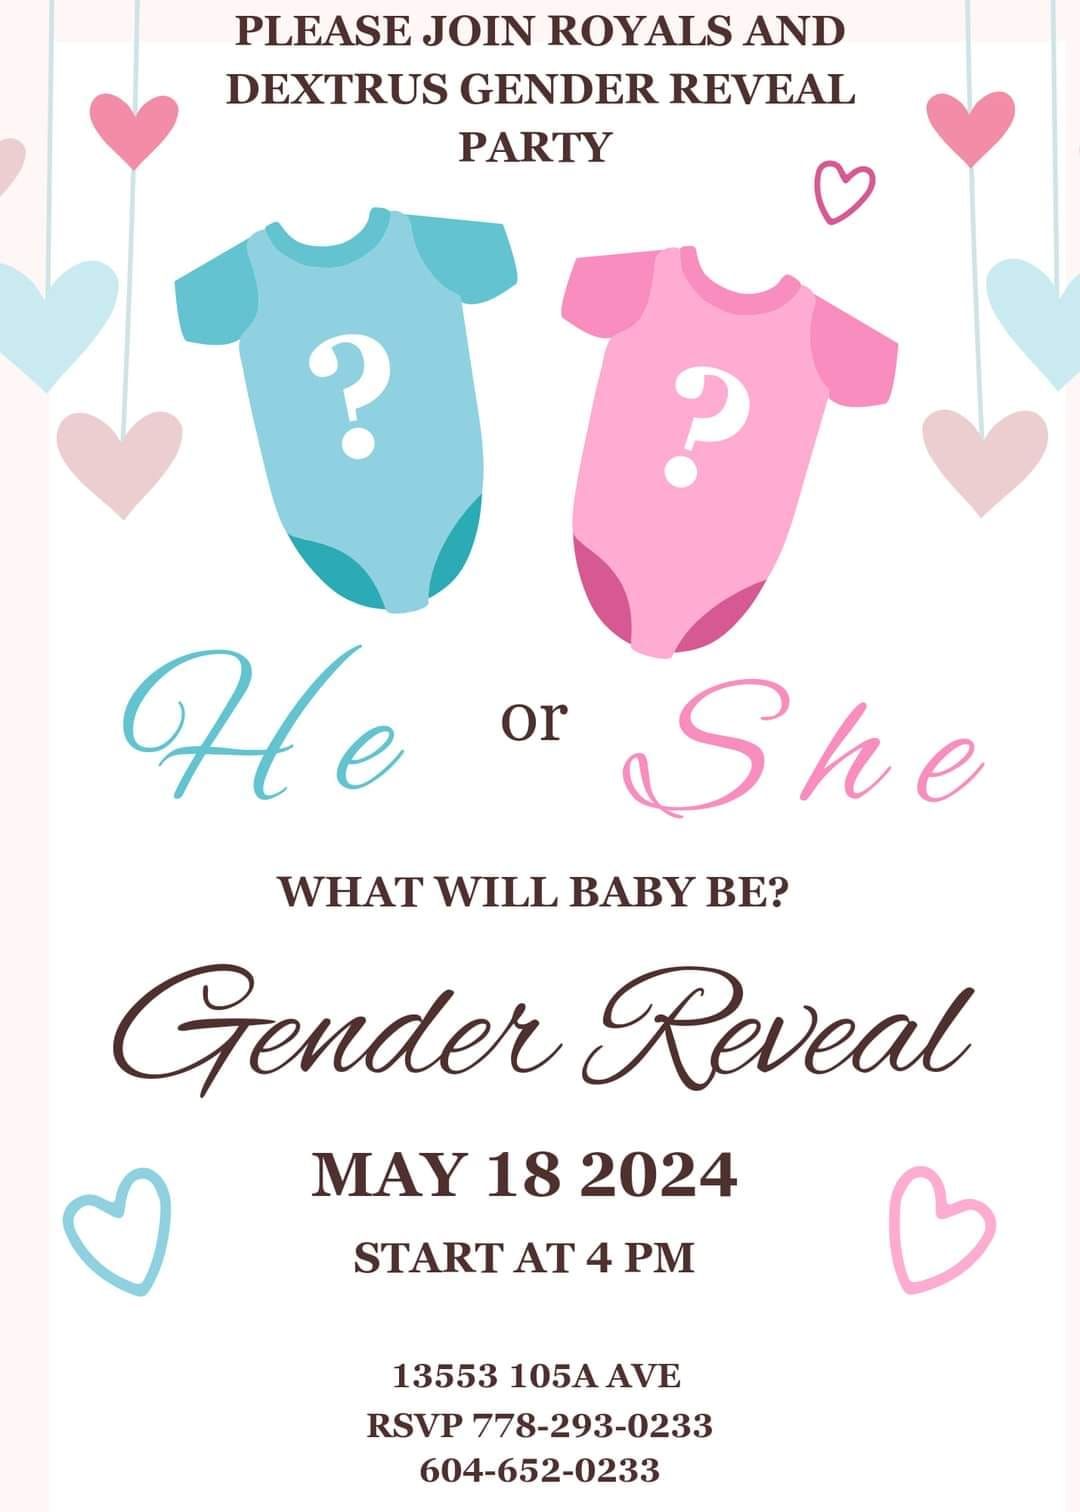 Royals and dhextrus gender reveal party